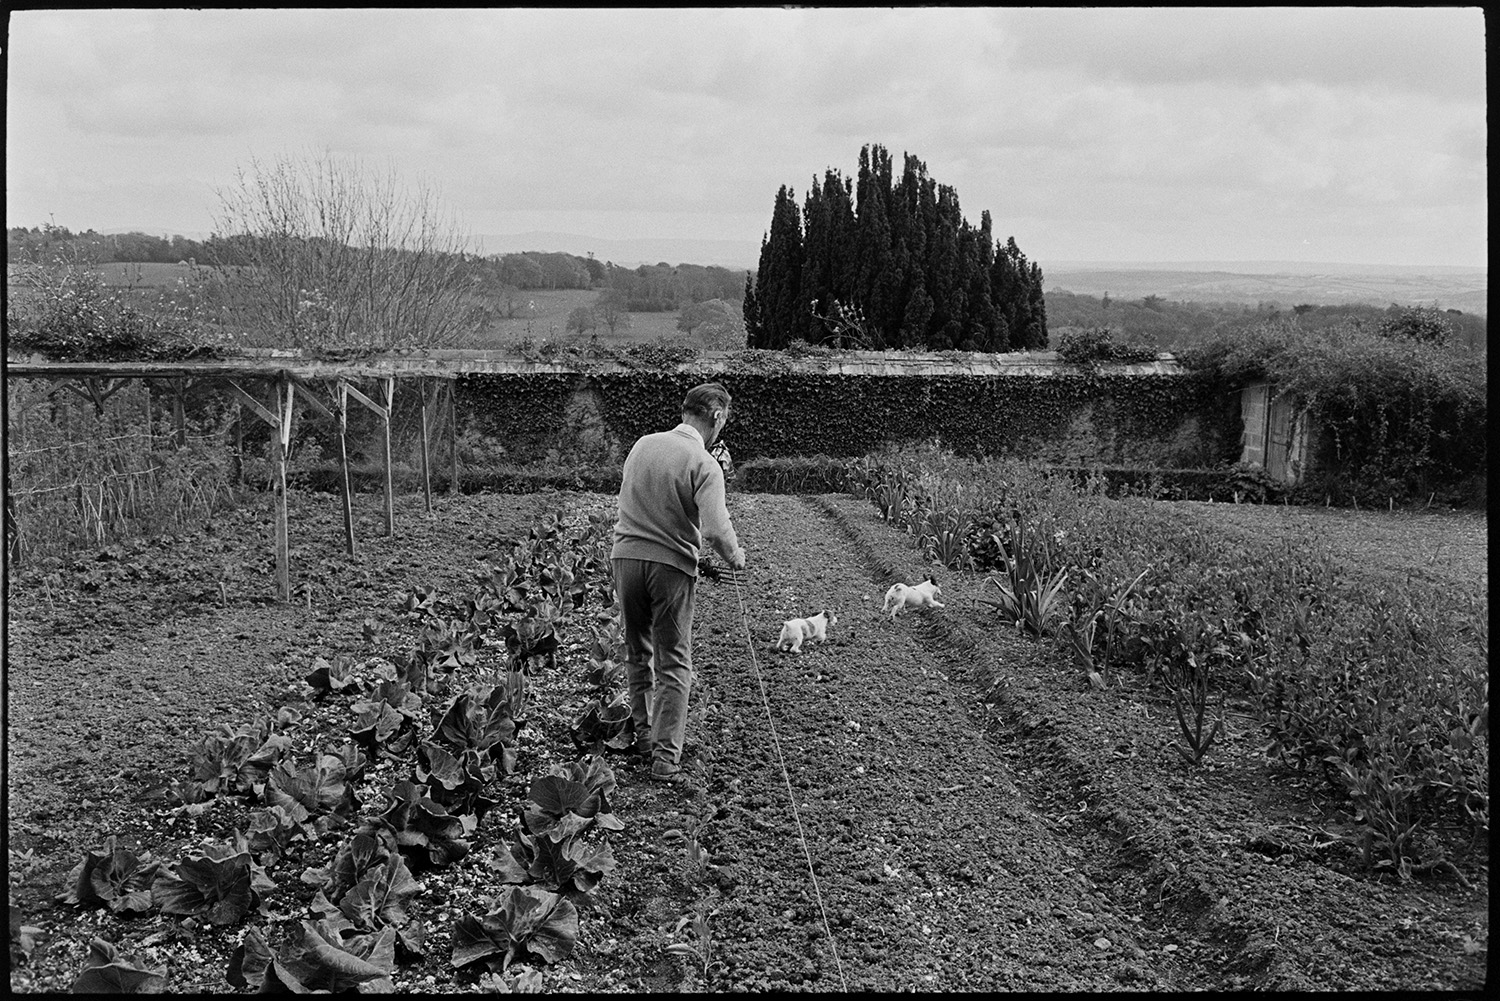 Man planting spring vegetables in walled garden, view of distant hills, Dartmoor. <br />
[A man measuring a line across a walled vegetable garden using a length of string before planting out spring vegetables, at The Old Rectory, Merton. He is accompanied by two dogs and other vegetables can be seen in the garden, as well as a netted fruit cage in the background. The hills of Dartmoor are just visible on the horizon.]